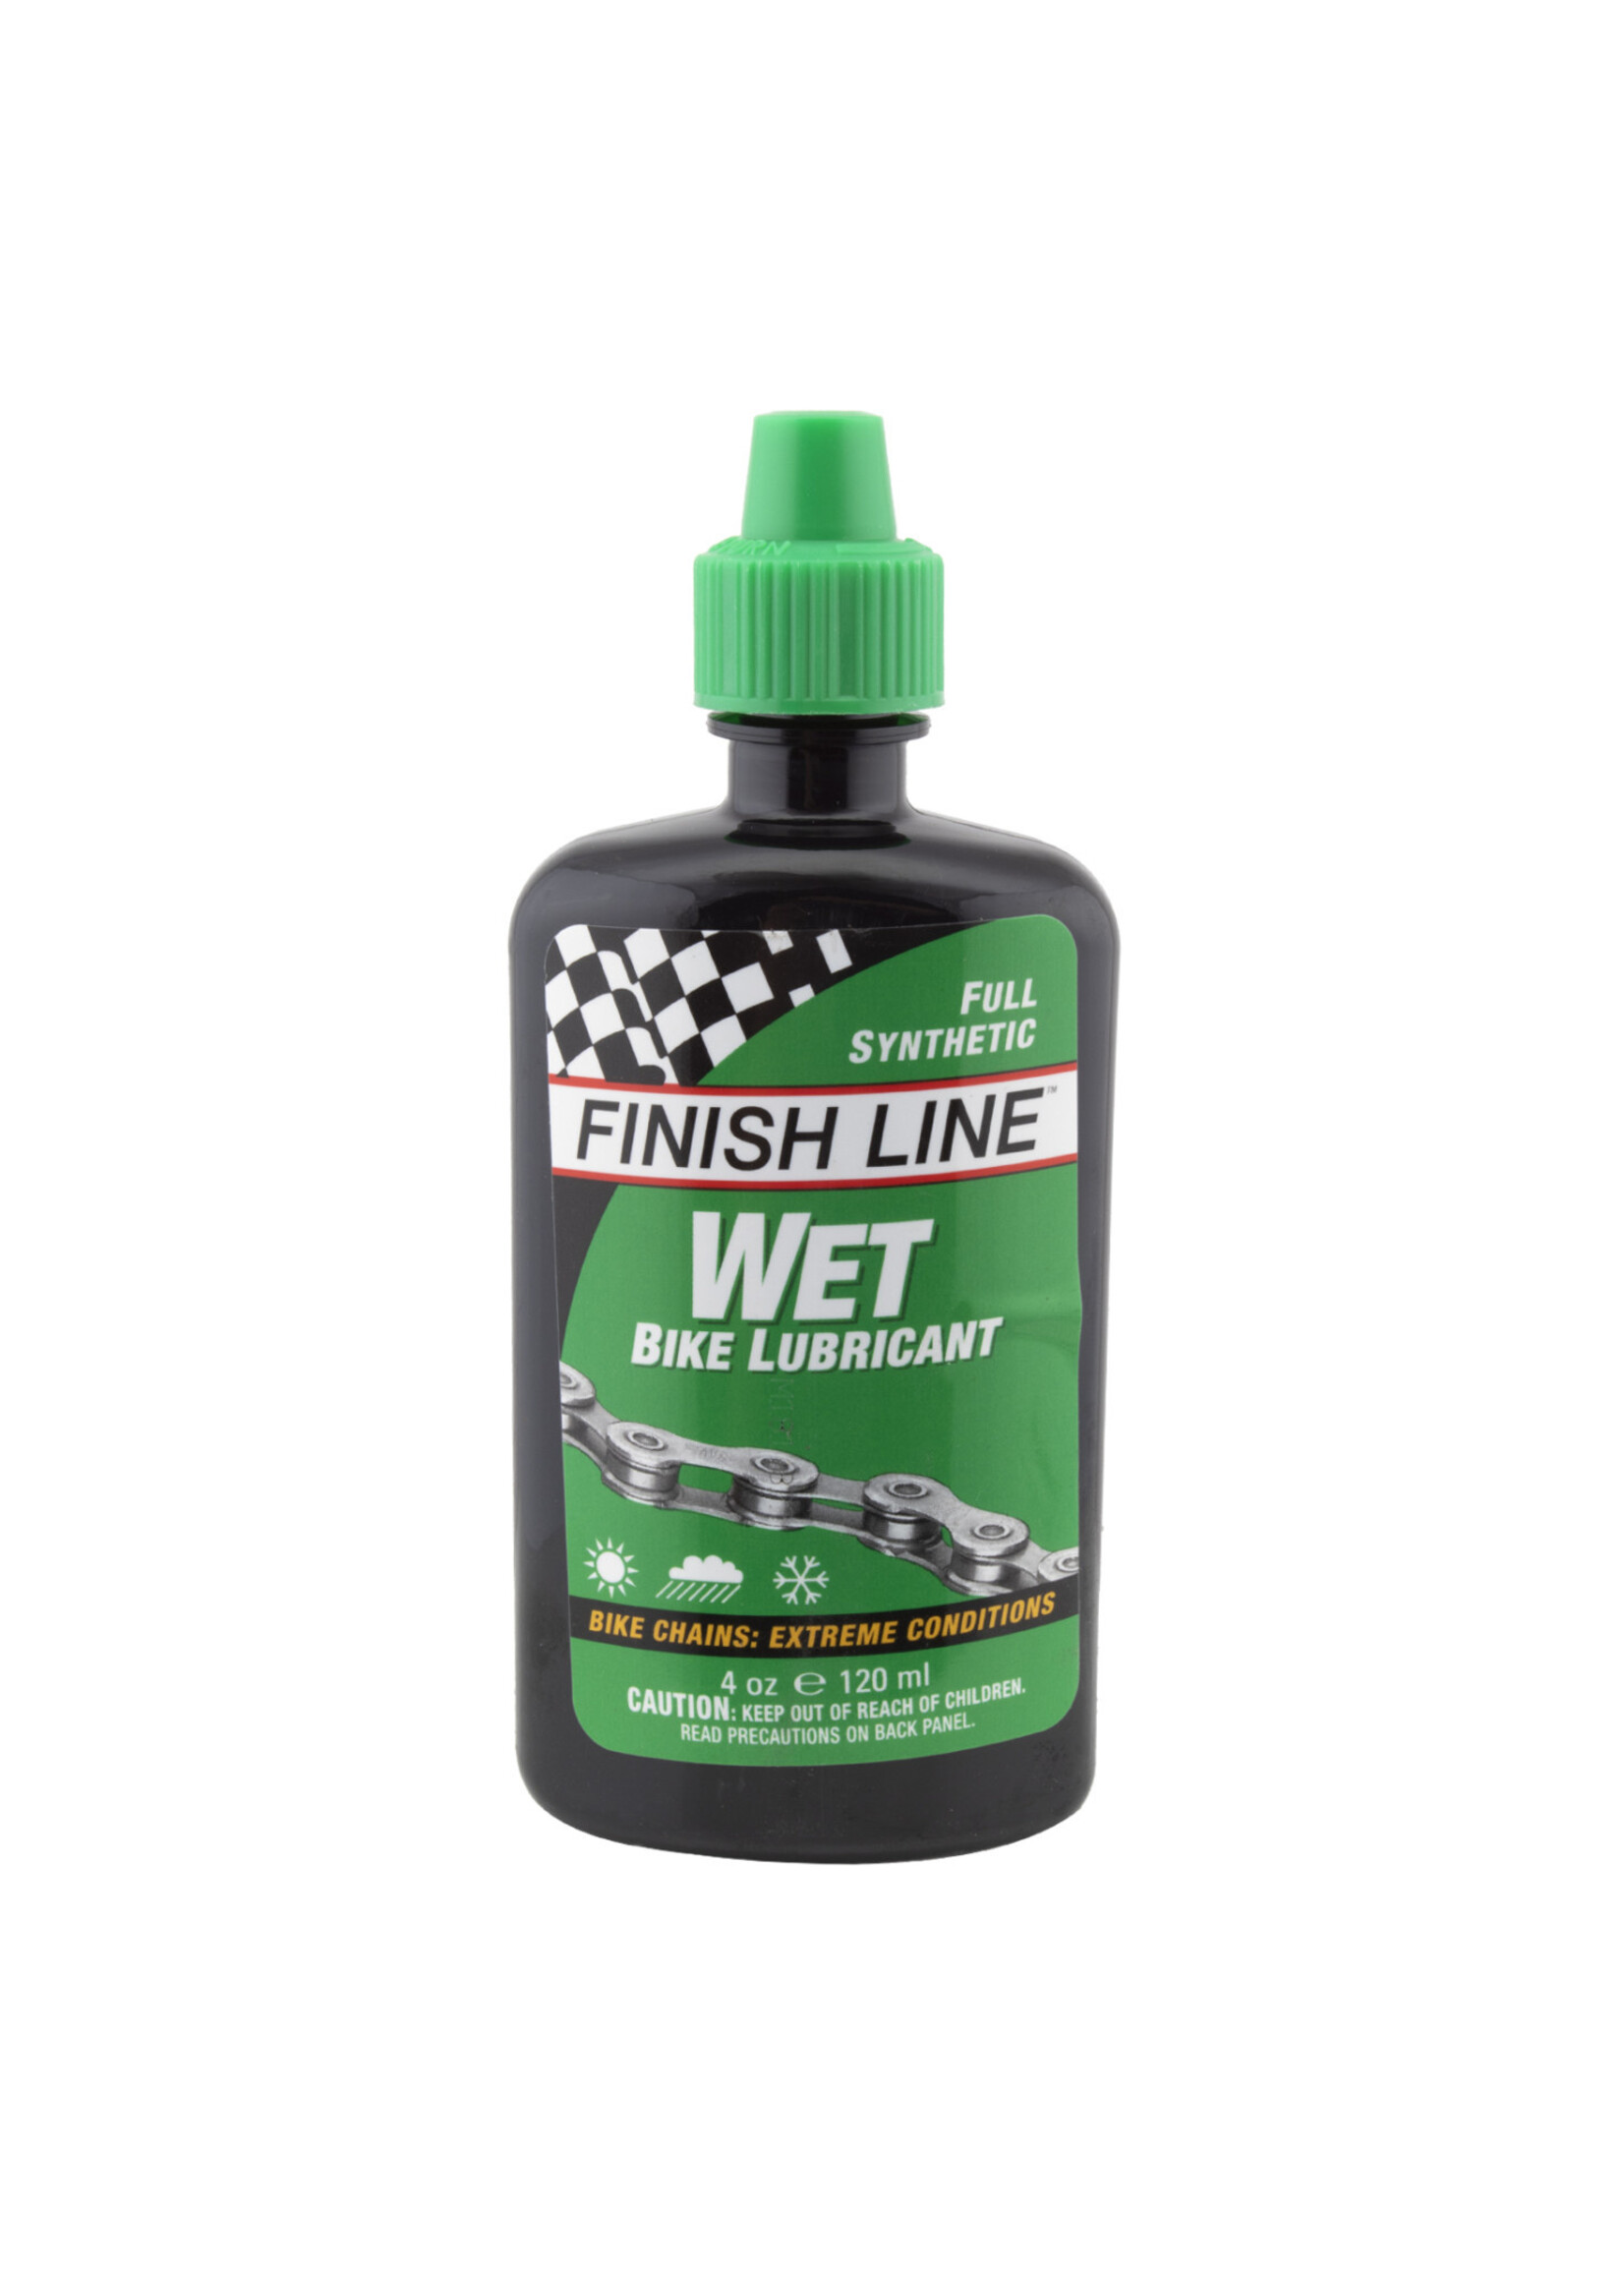 Finish Line LUBE F-L CROSS COUNTRY WET 4oz DRIP BOTTLE 12/bx